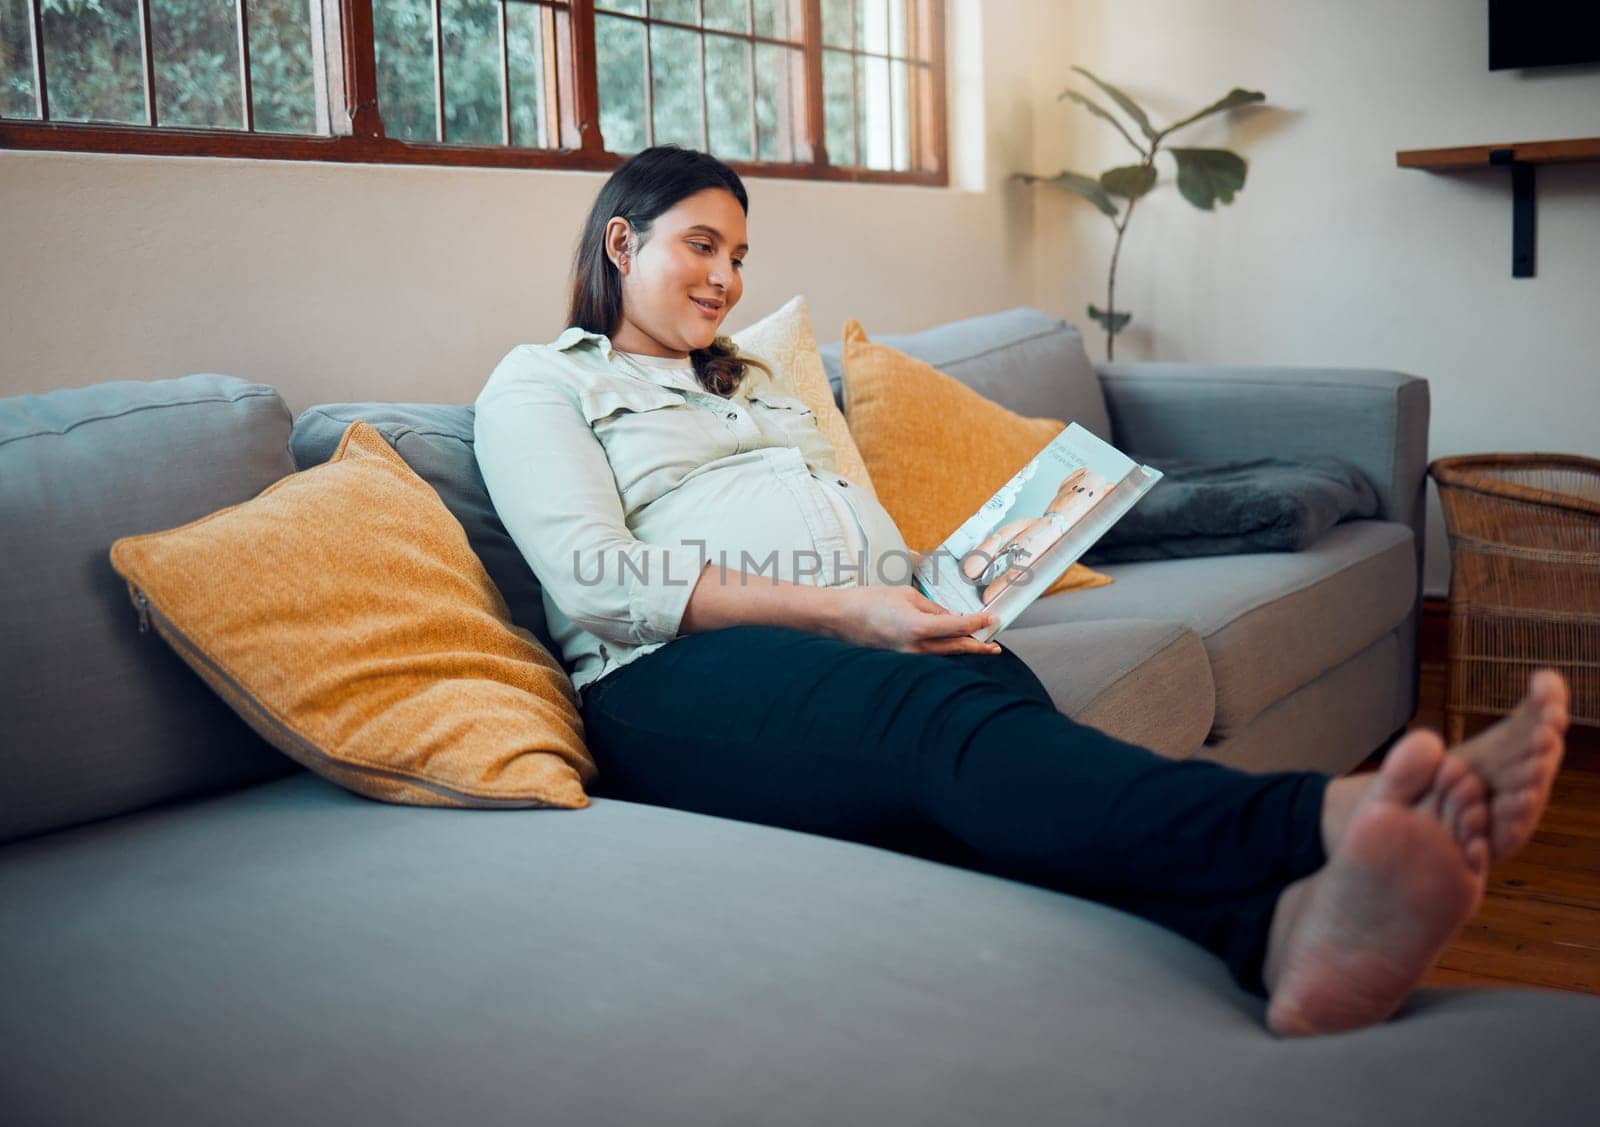 Pregnancy, reading and woman with a book on the sofa for her baby, relax and peace in the living room of a house. Education, calm and happy pregnant mother with a story for her unborn child on couch by YuriArcurs